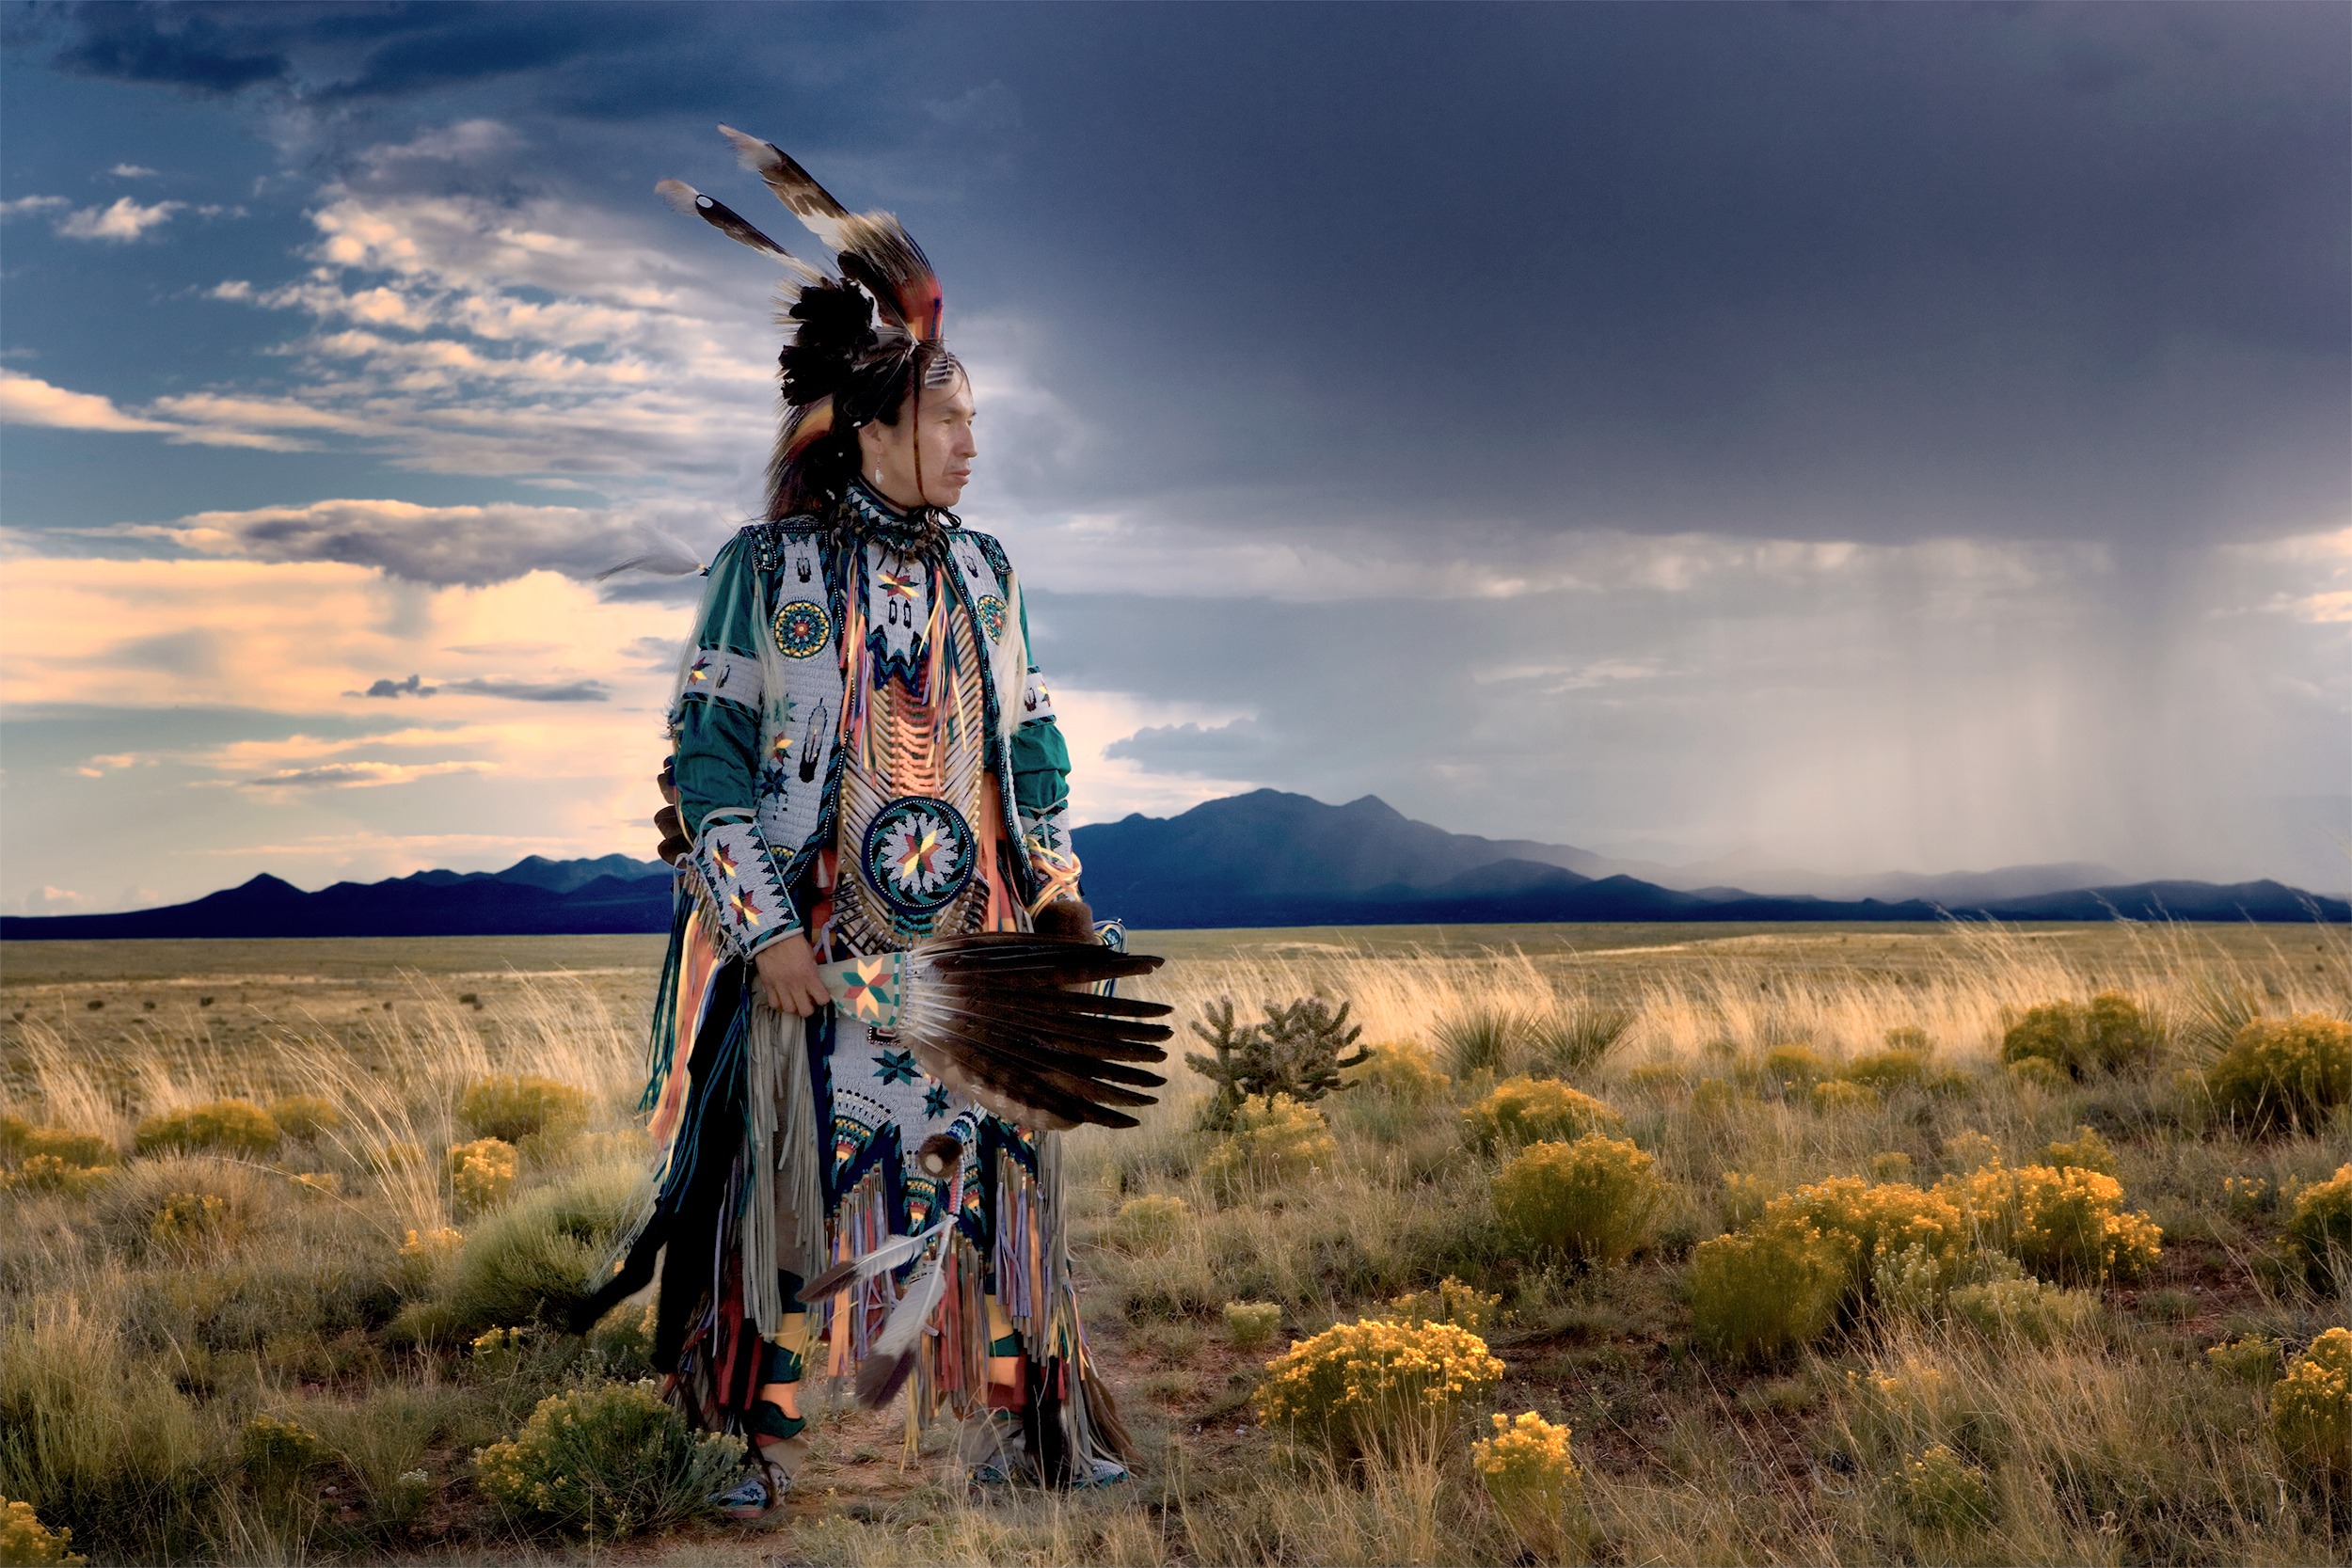 Omaha Indian Dancer Anthony and Approaching Storm, Summer, San Marcos, NM, 2007